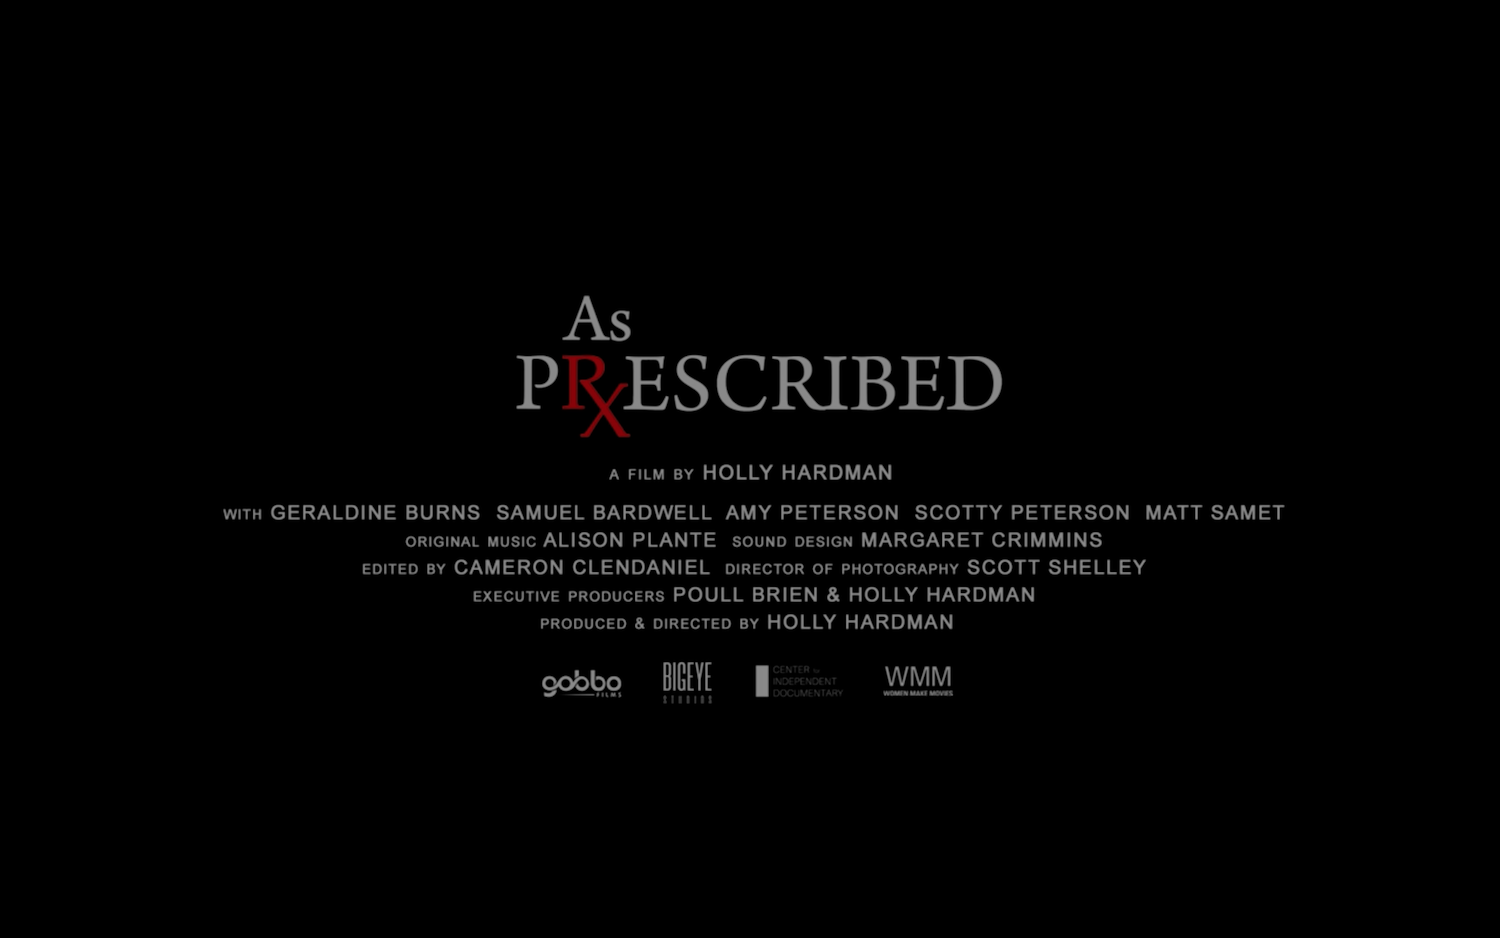 Trailer Poster 3 - As Prescribed Documentary